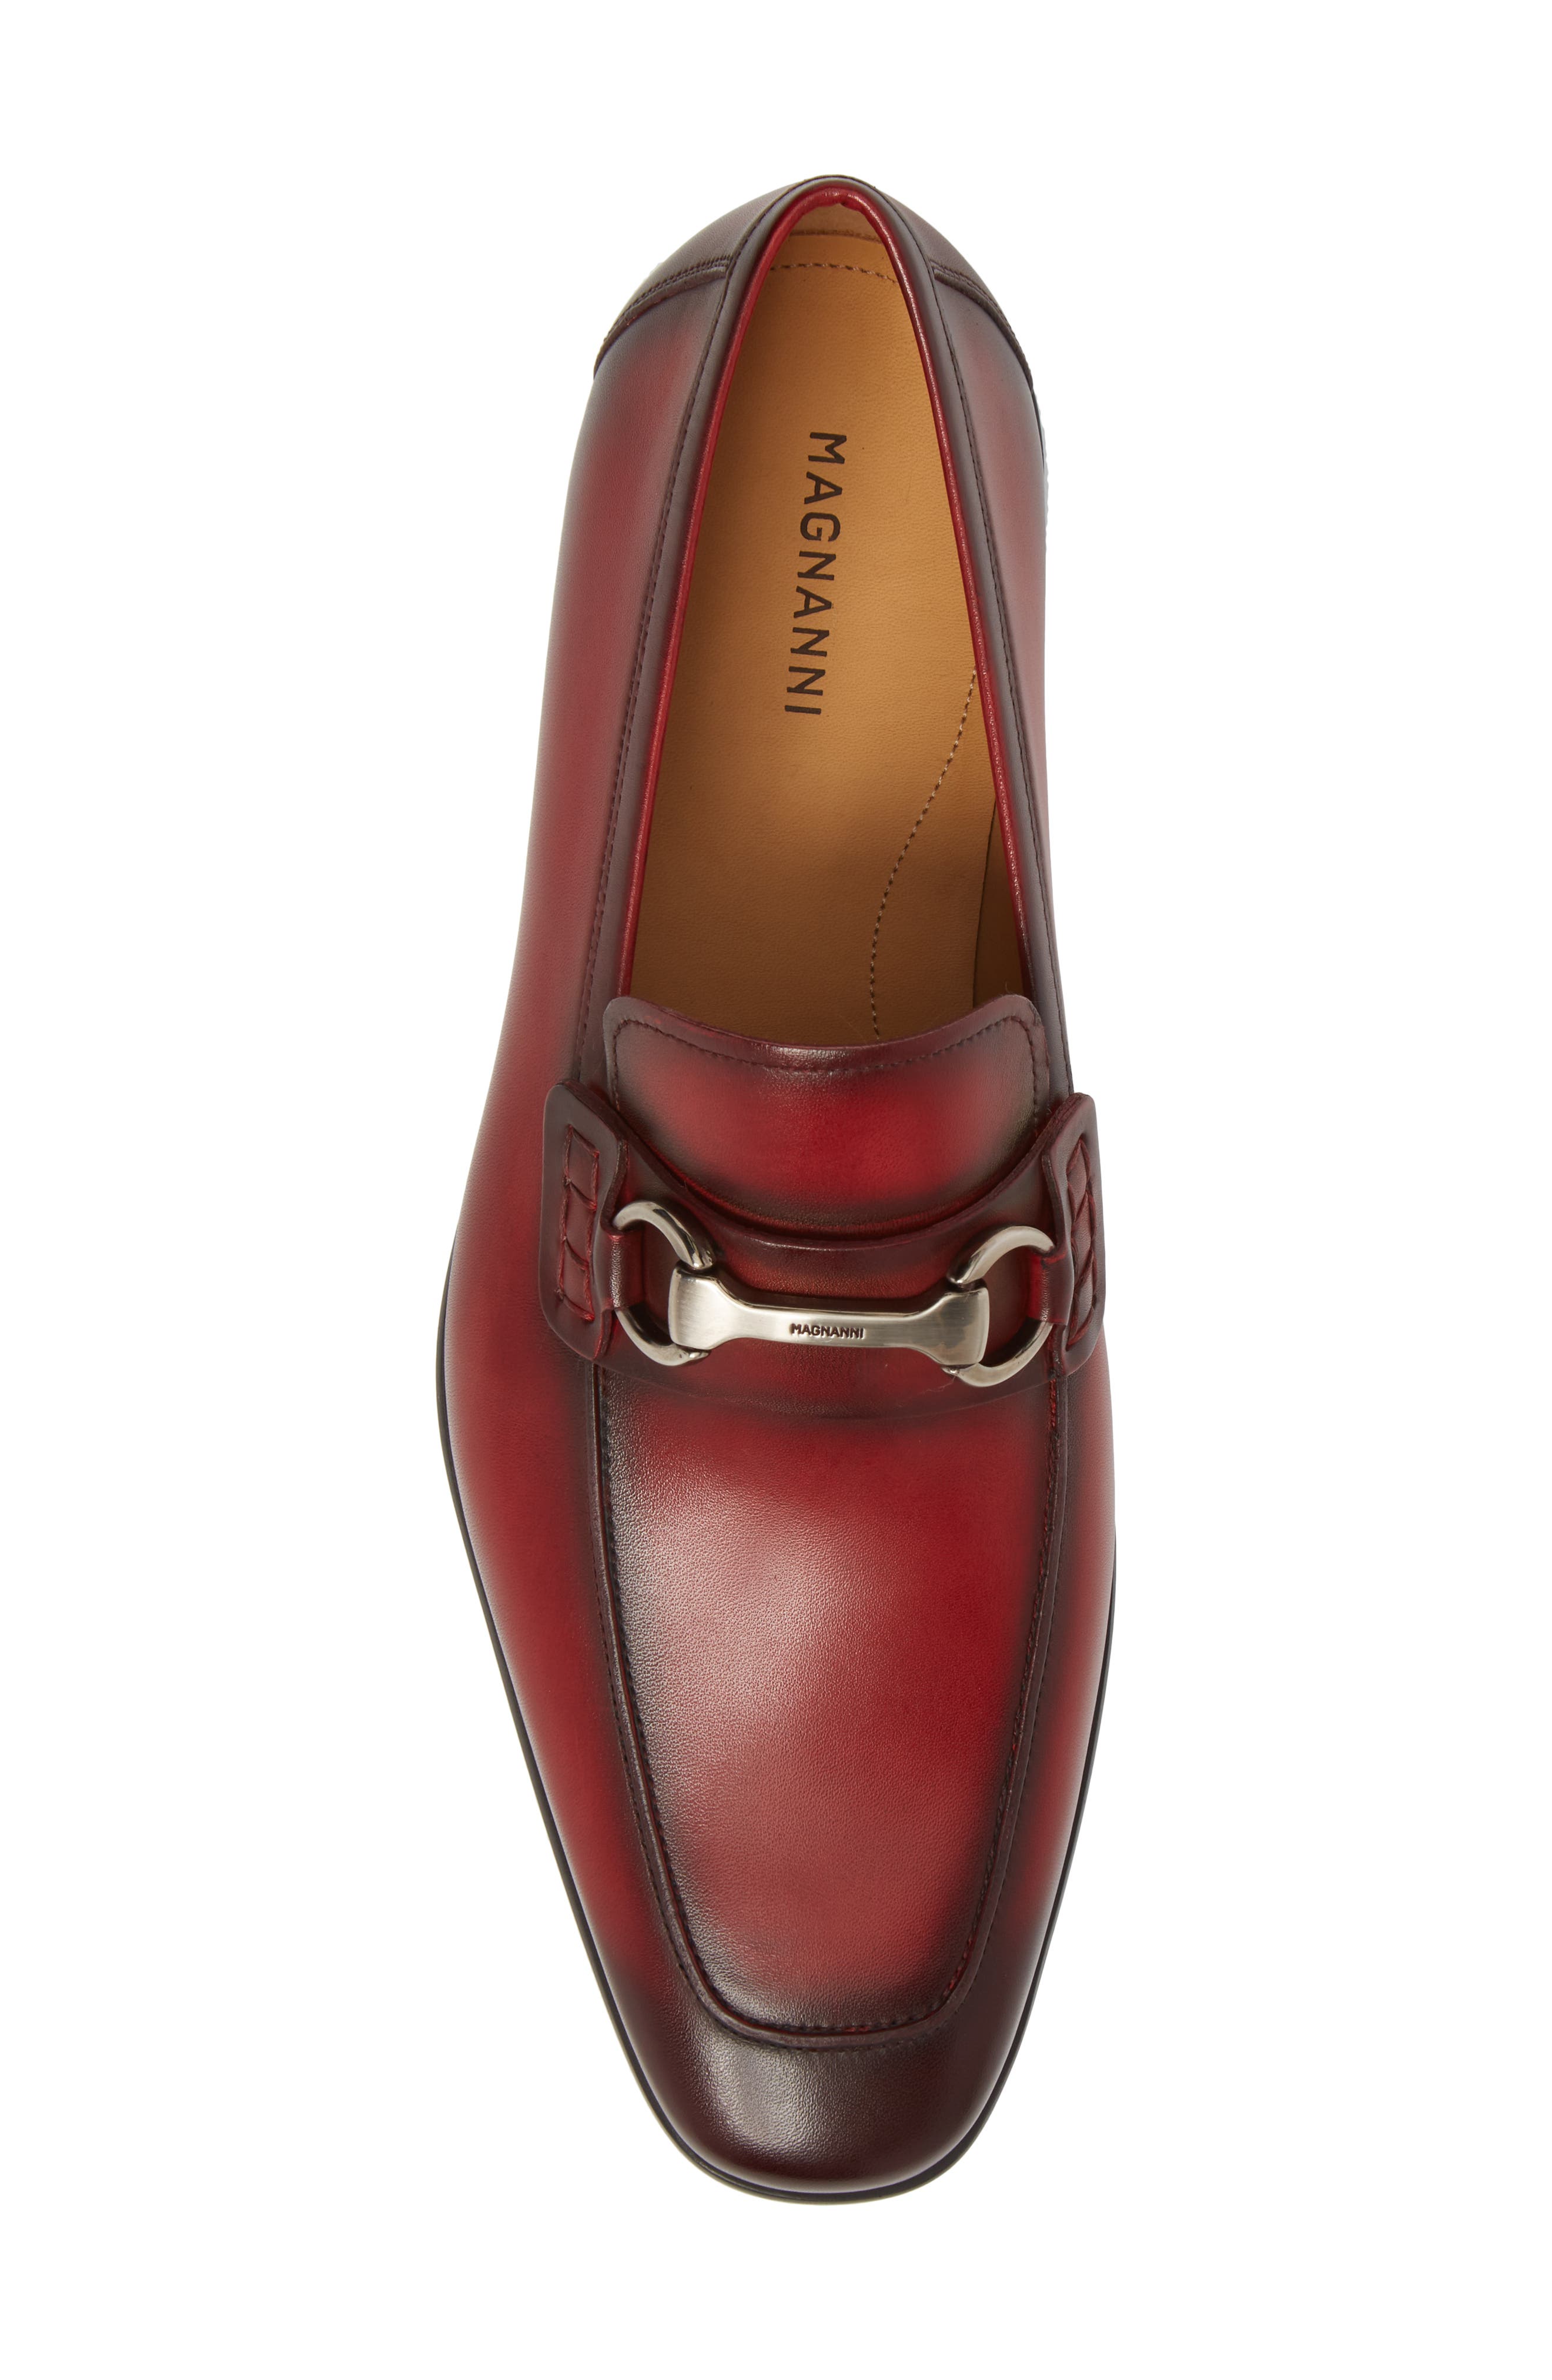 Red Bit Loafer Charm: Magnanni's Rafa II in Red